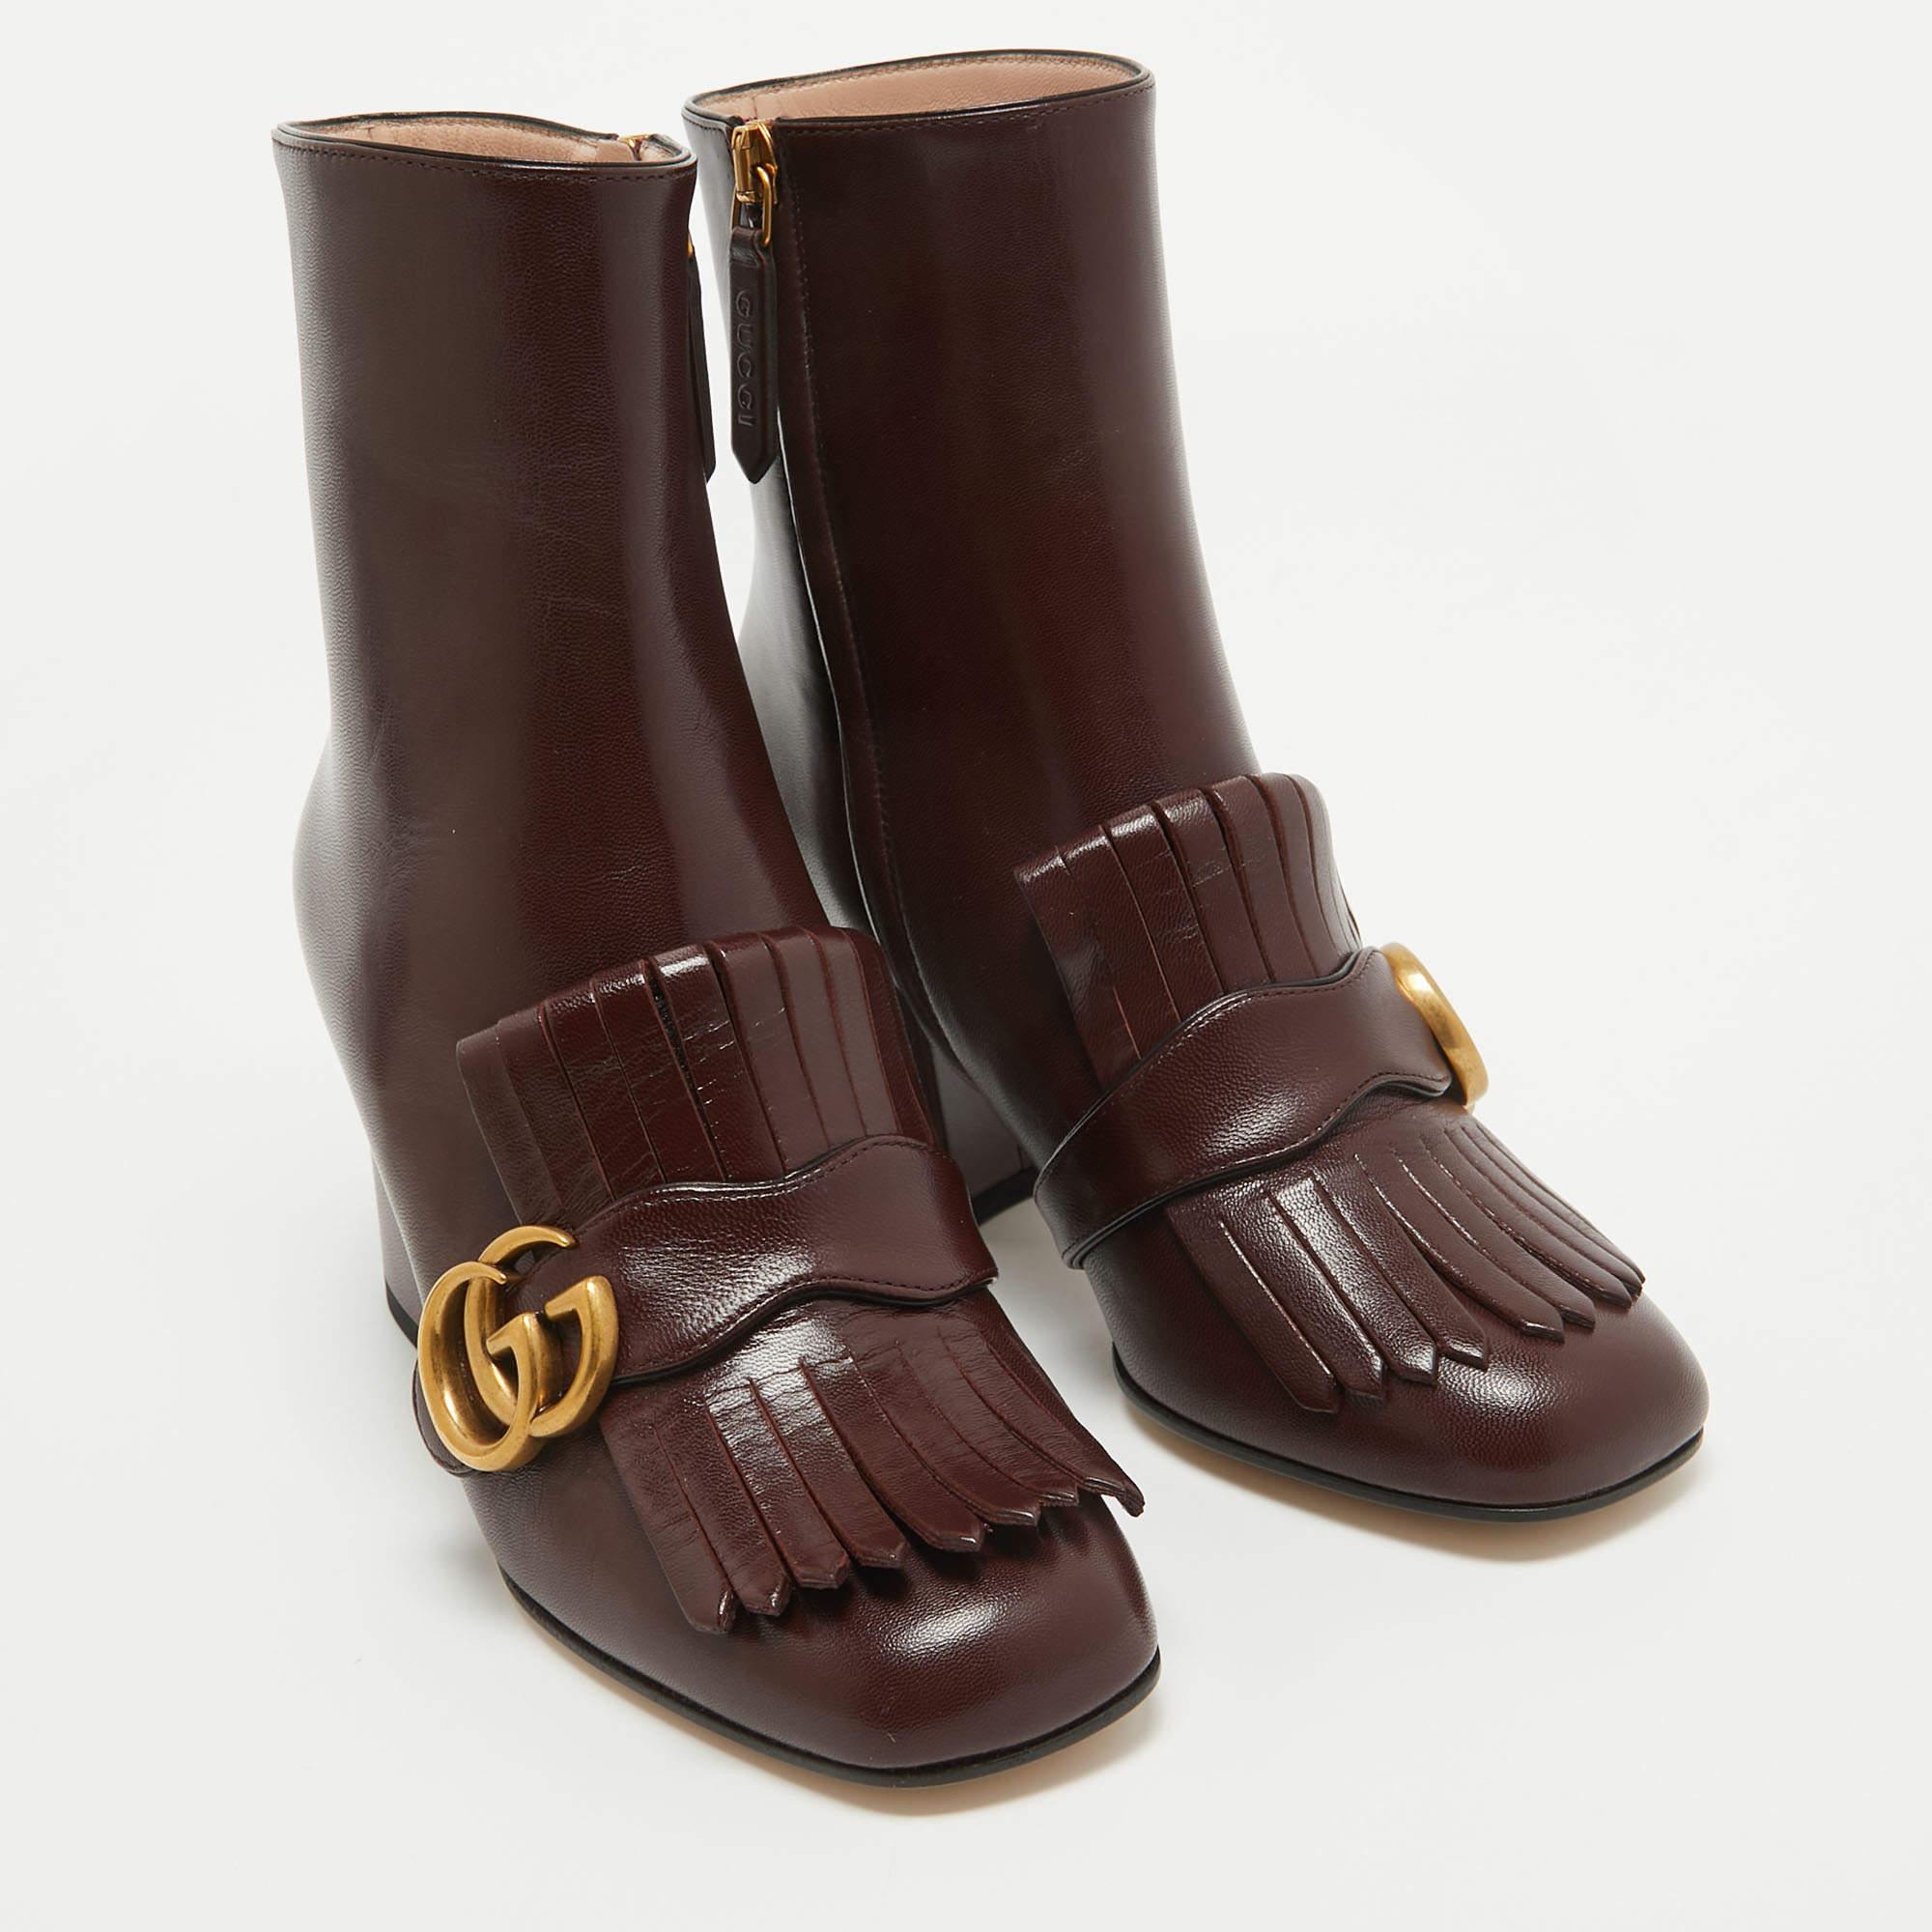 Gucci Burgundy Leather GG Marmont Fringe Ankle Boots Size 35.5 In Good Condition For Sale In Dubai, Al Qouz 2